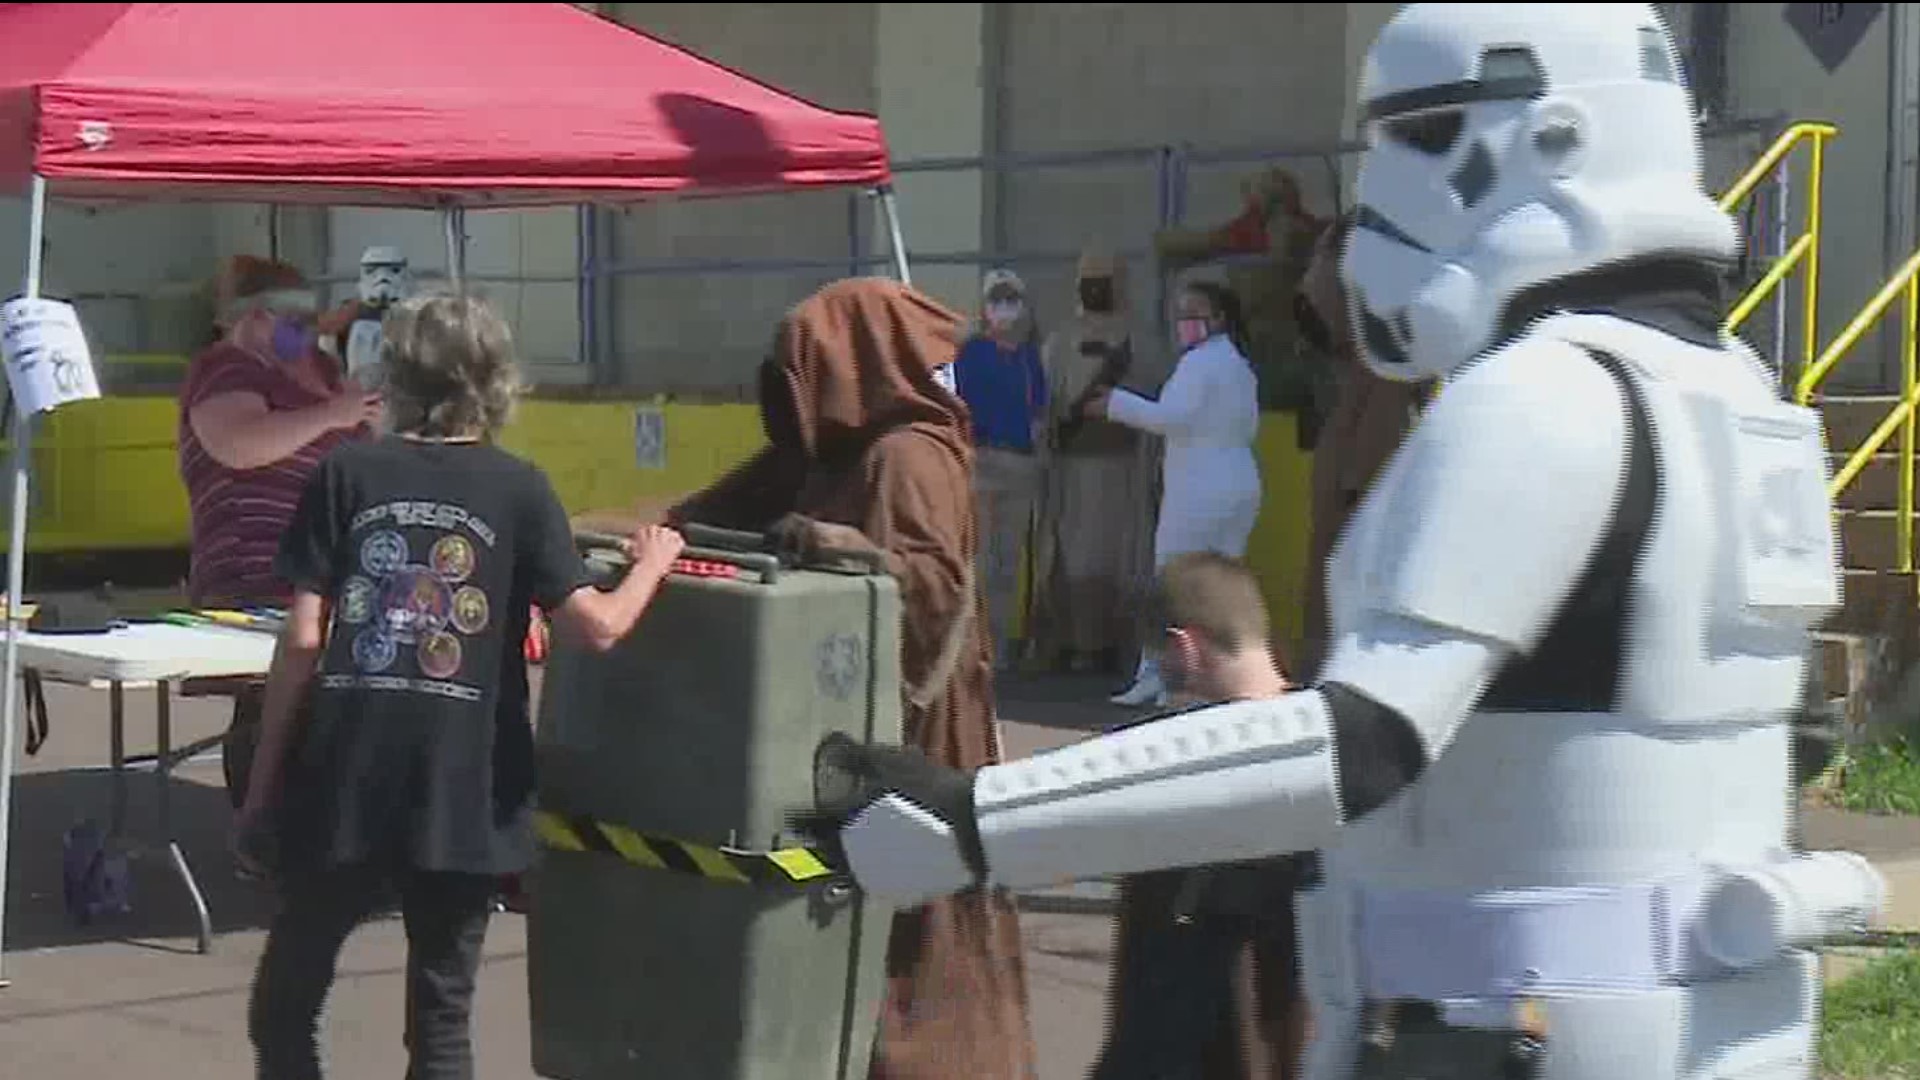 If you've ever dreamed of being Star Wars Jedi, the Children's Museum of Bloomsburg was the place to be Saturday.